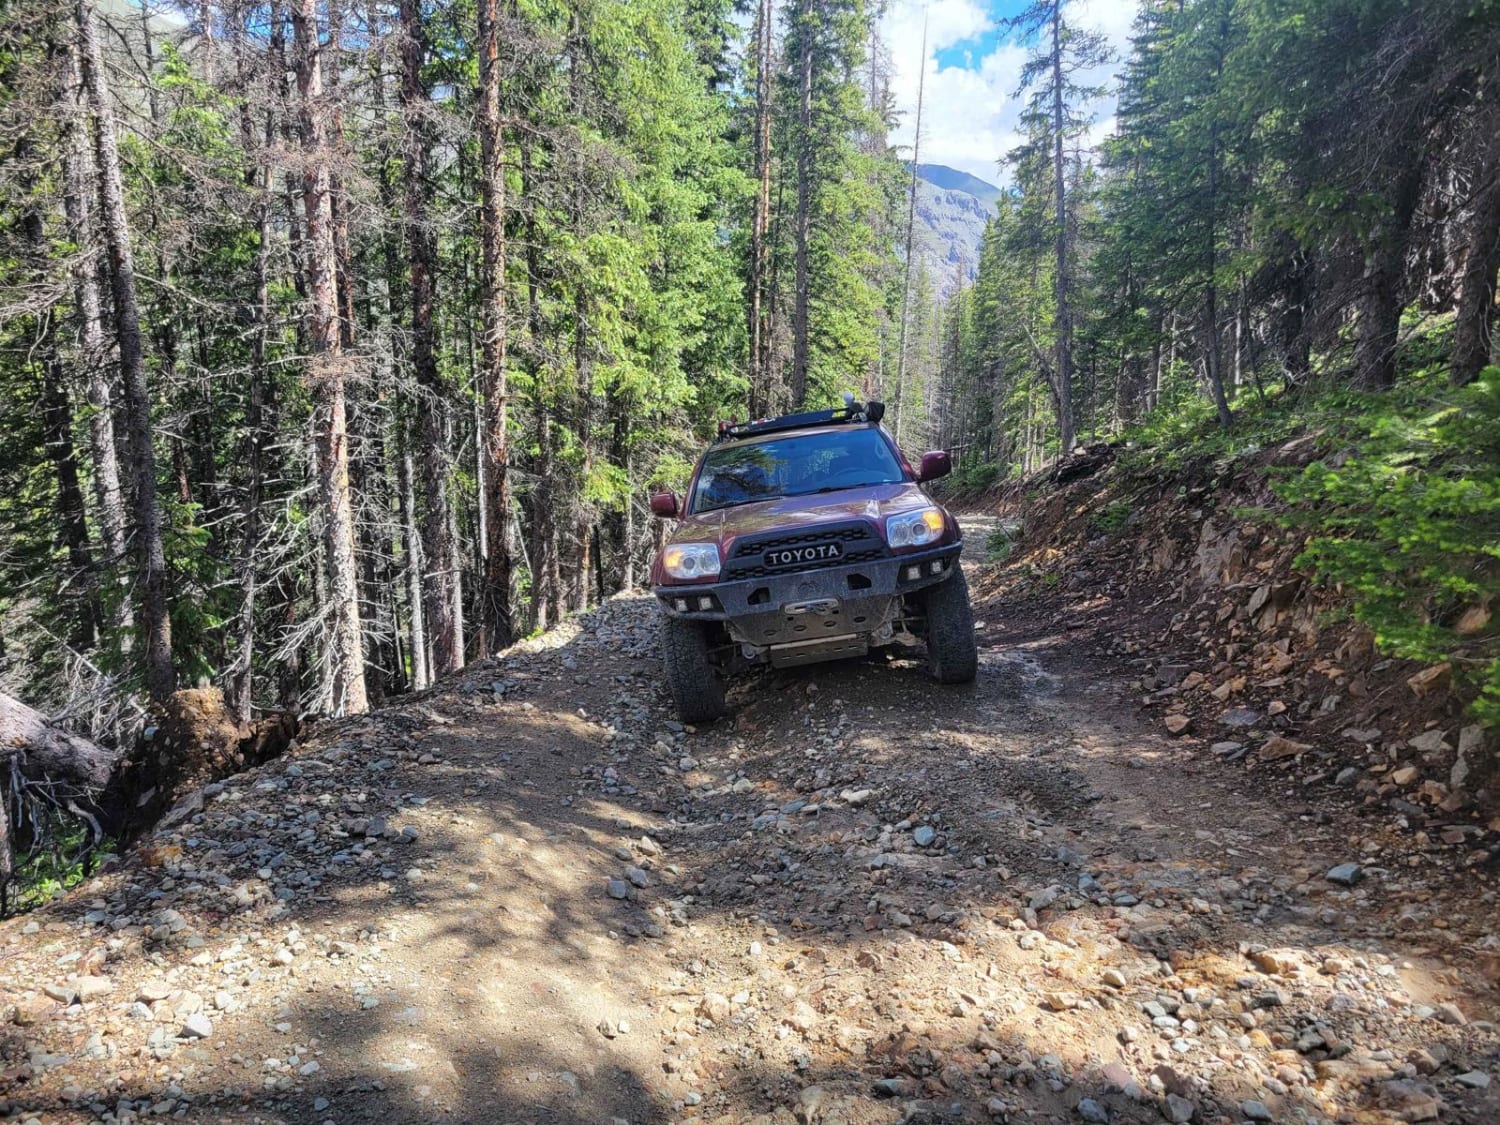 Arrastra Gulch to Little Giant Basin